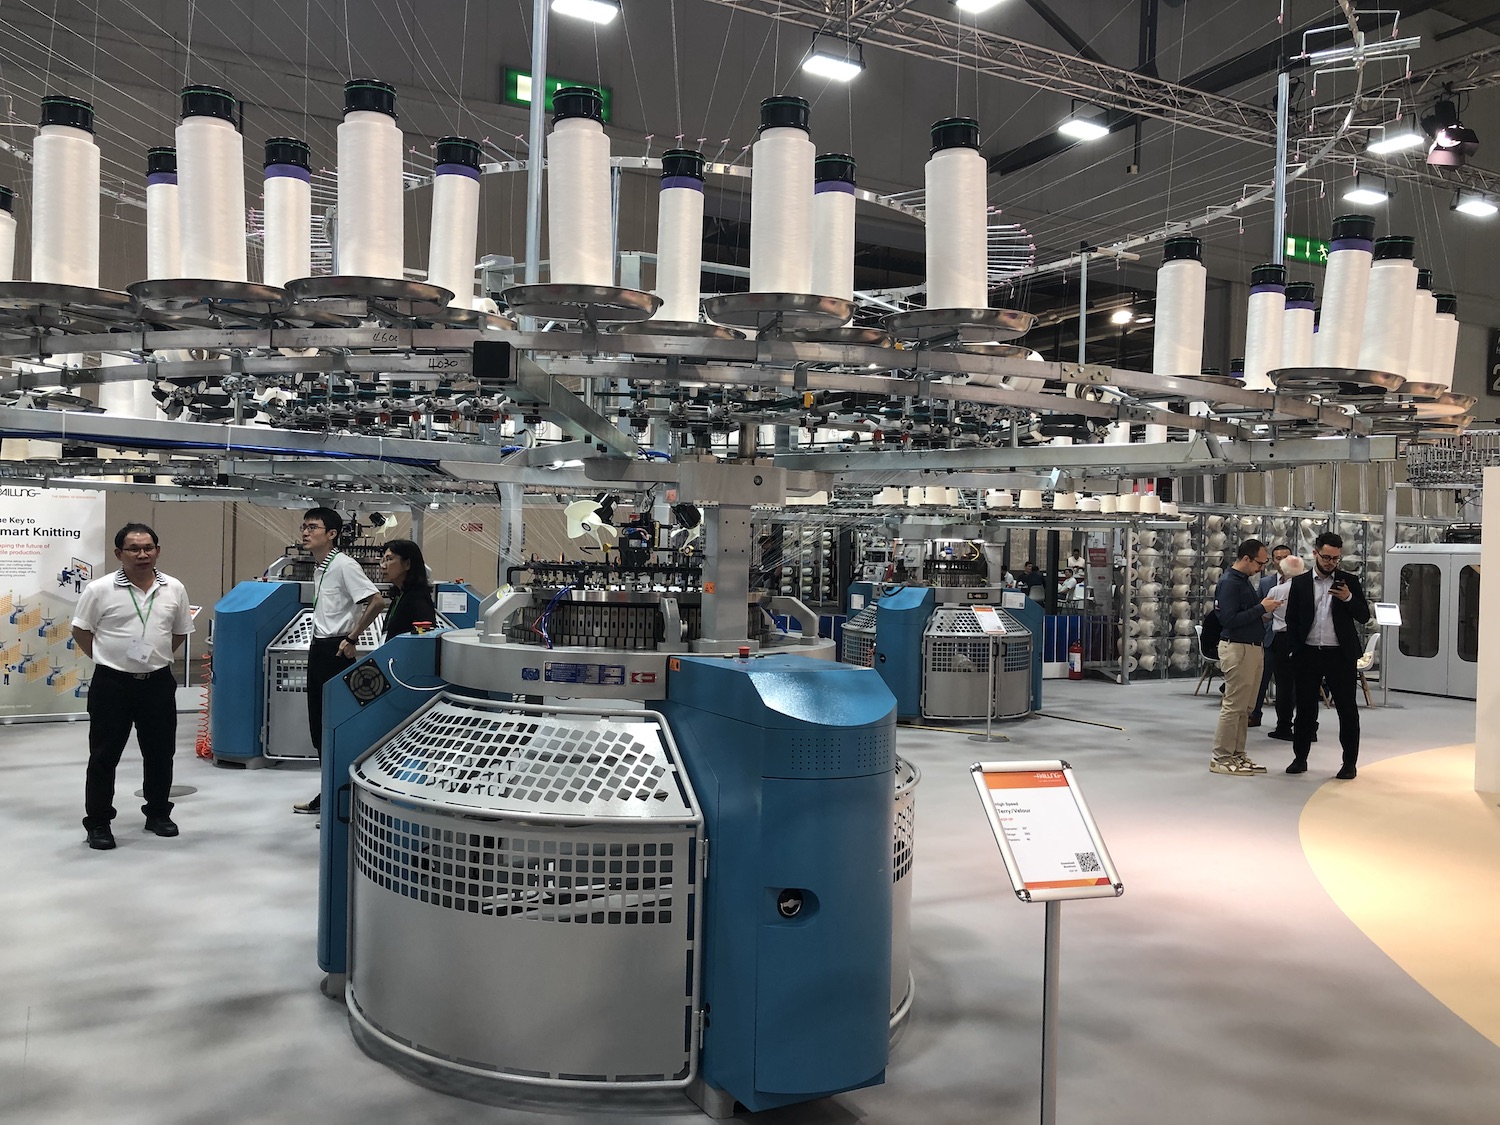 Pailung machines on show in Milan. © Knitting Industry